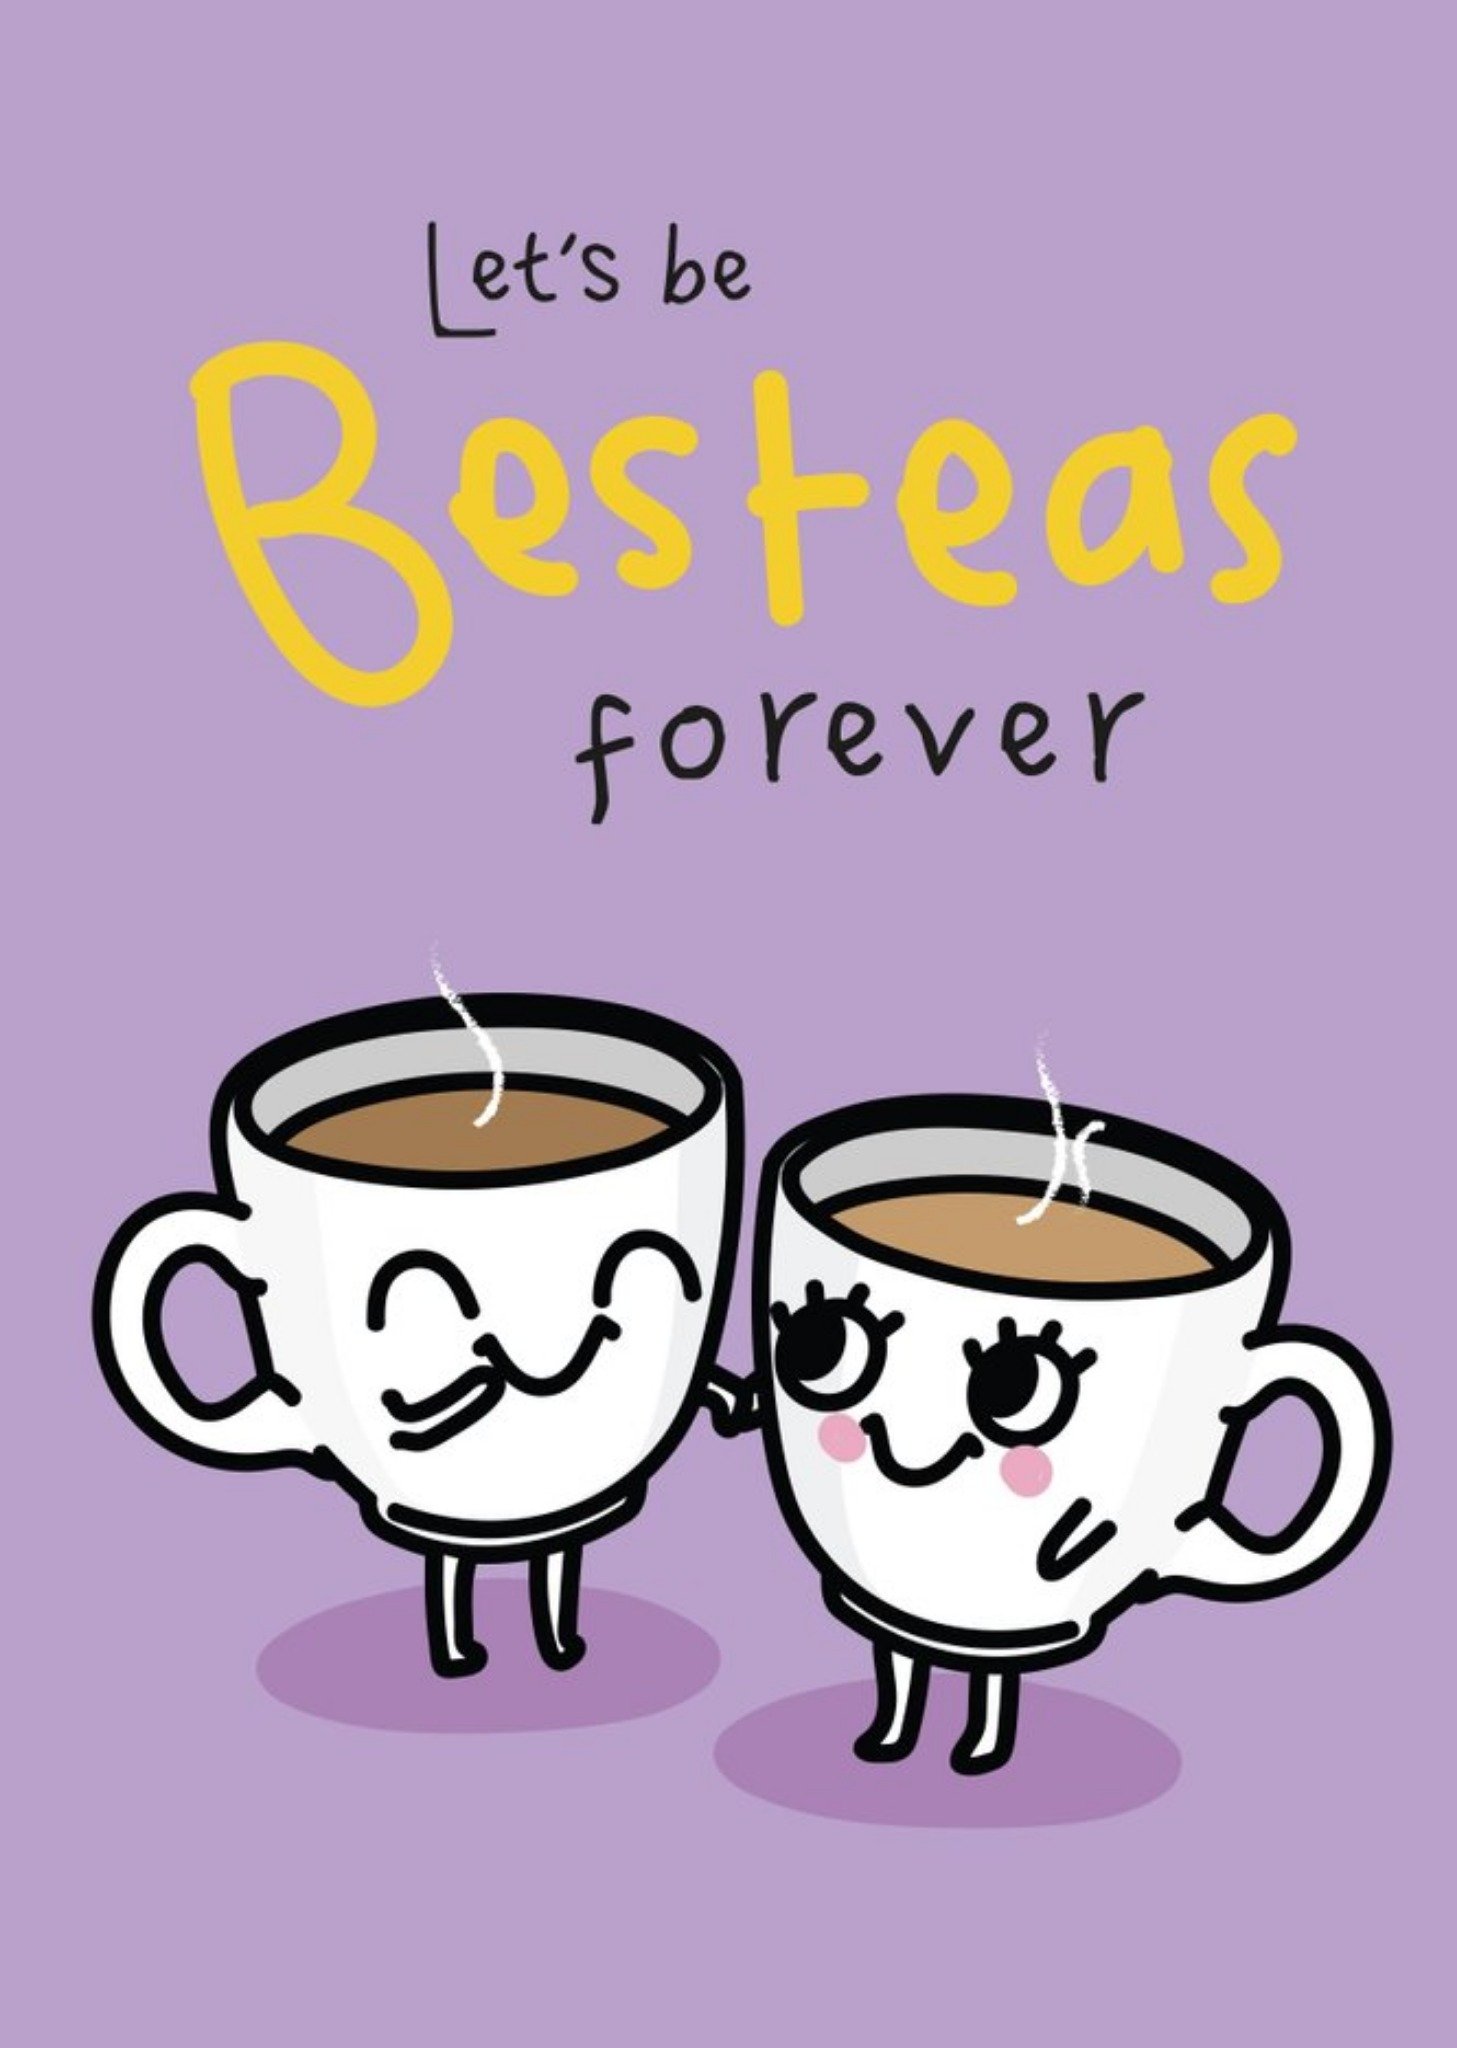 Moonpig Let's Be Besteas Forever Funny Pun Card, Large